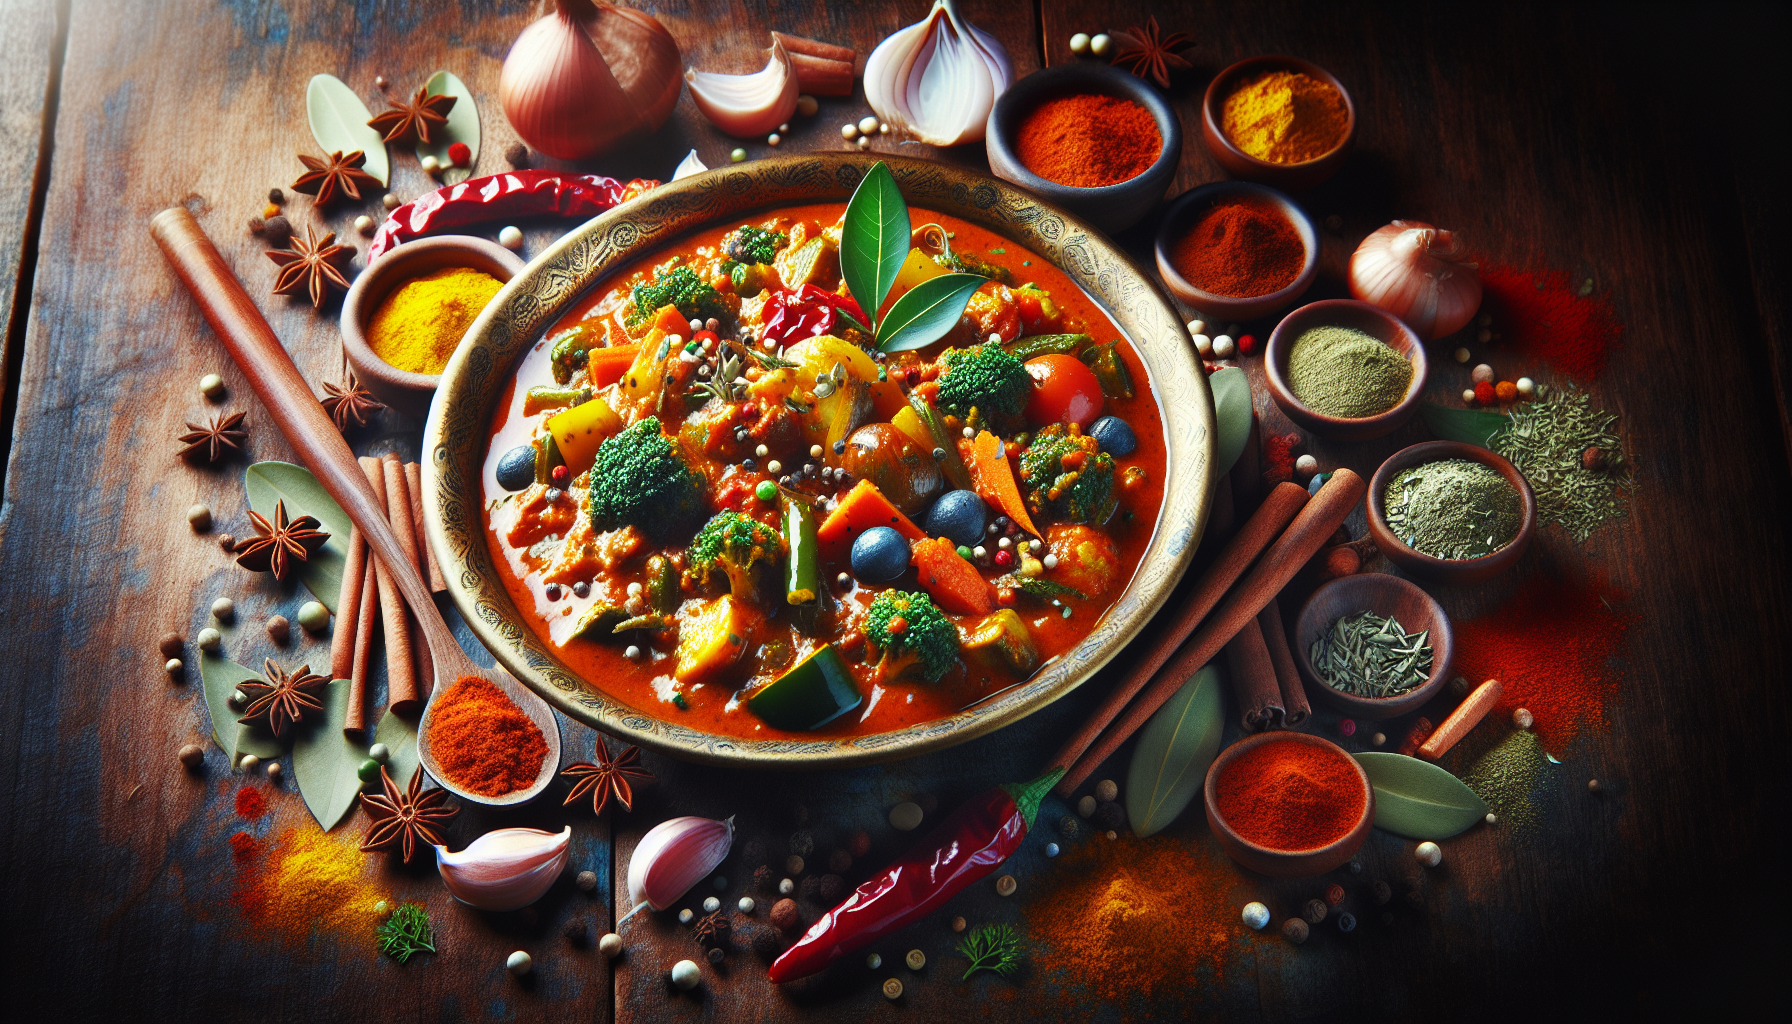 Share Your Take On A Classic Indian Curry With Unique Spices And Flavors.